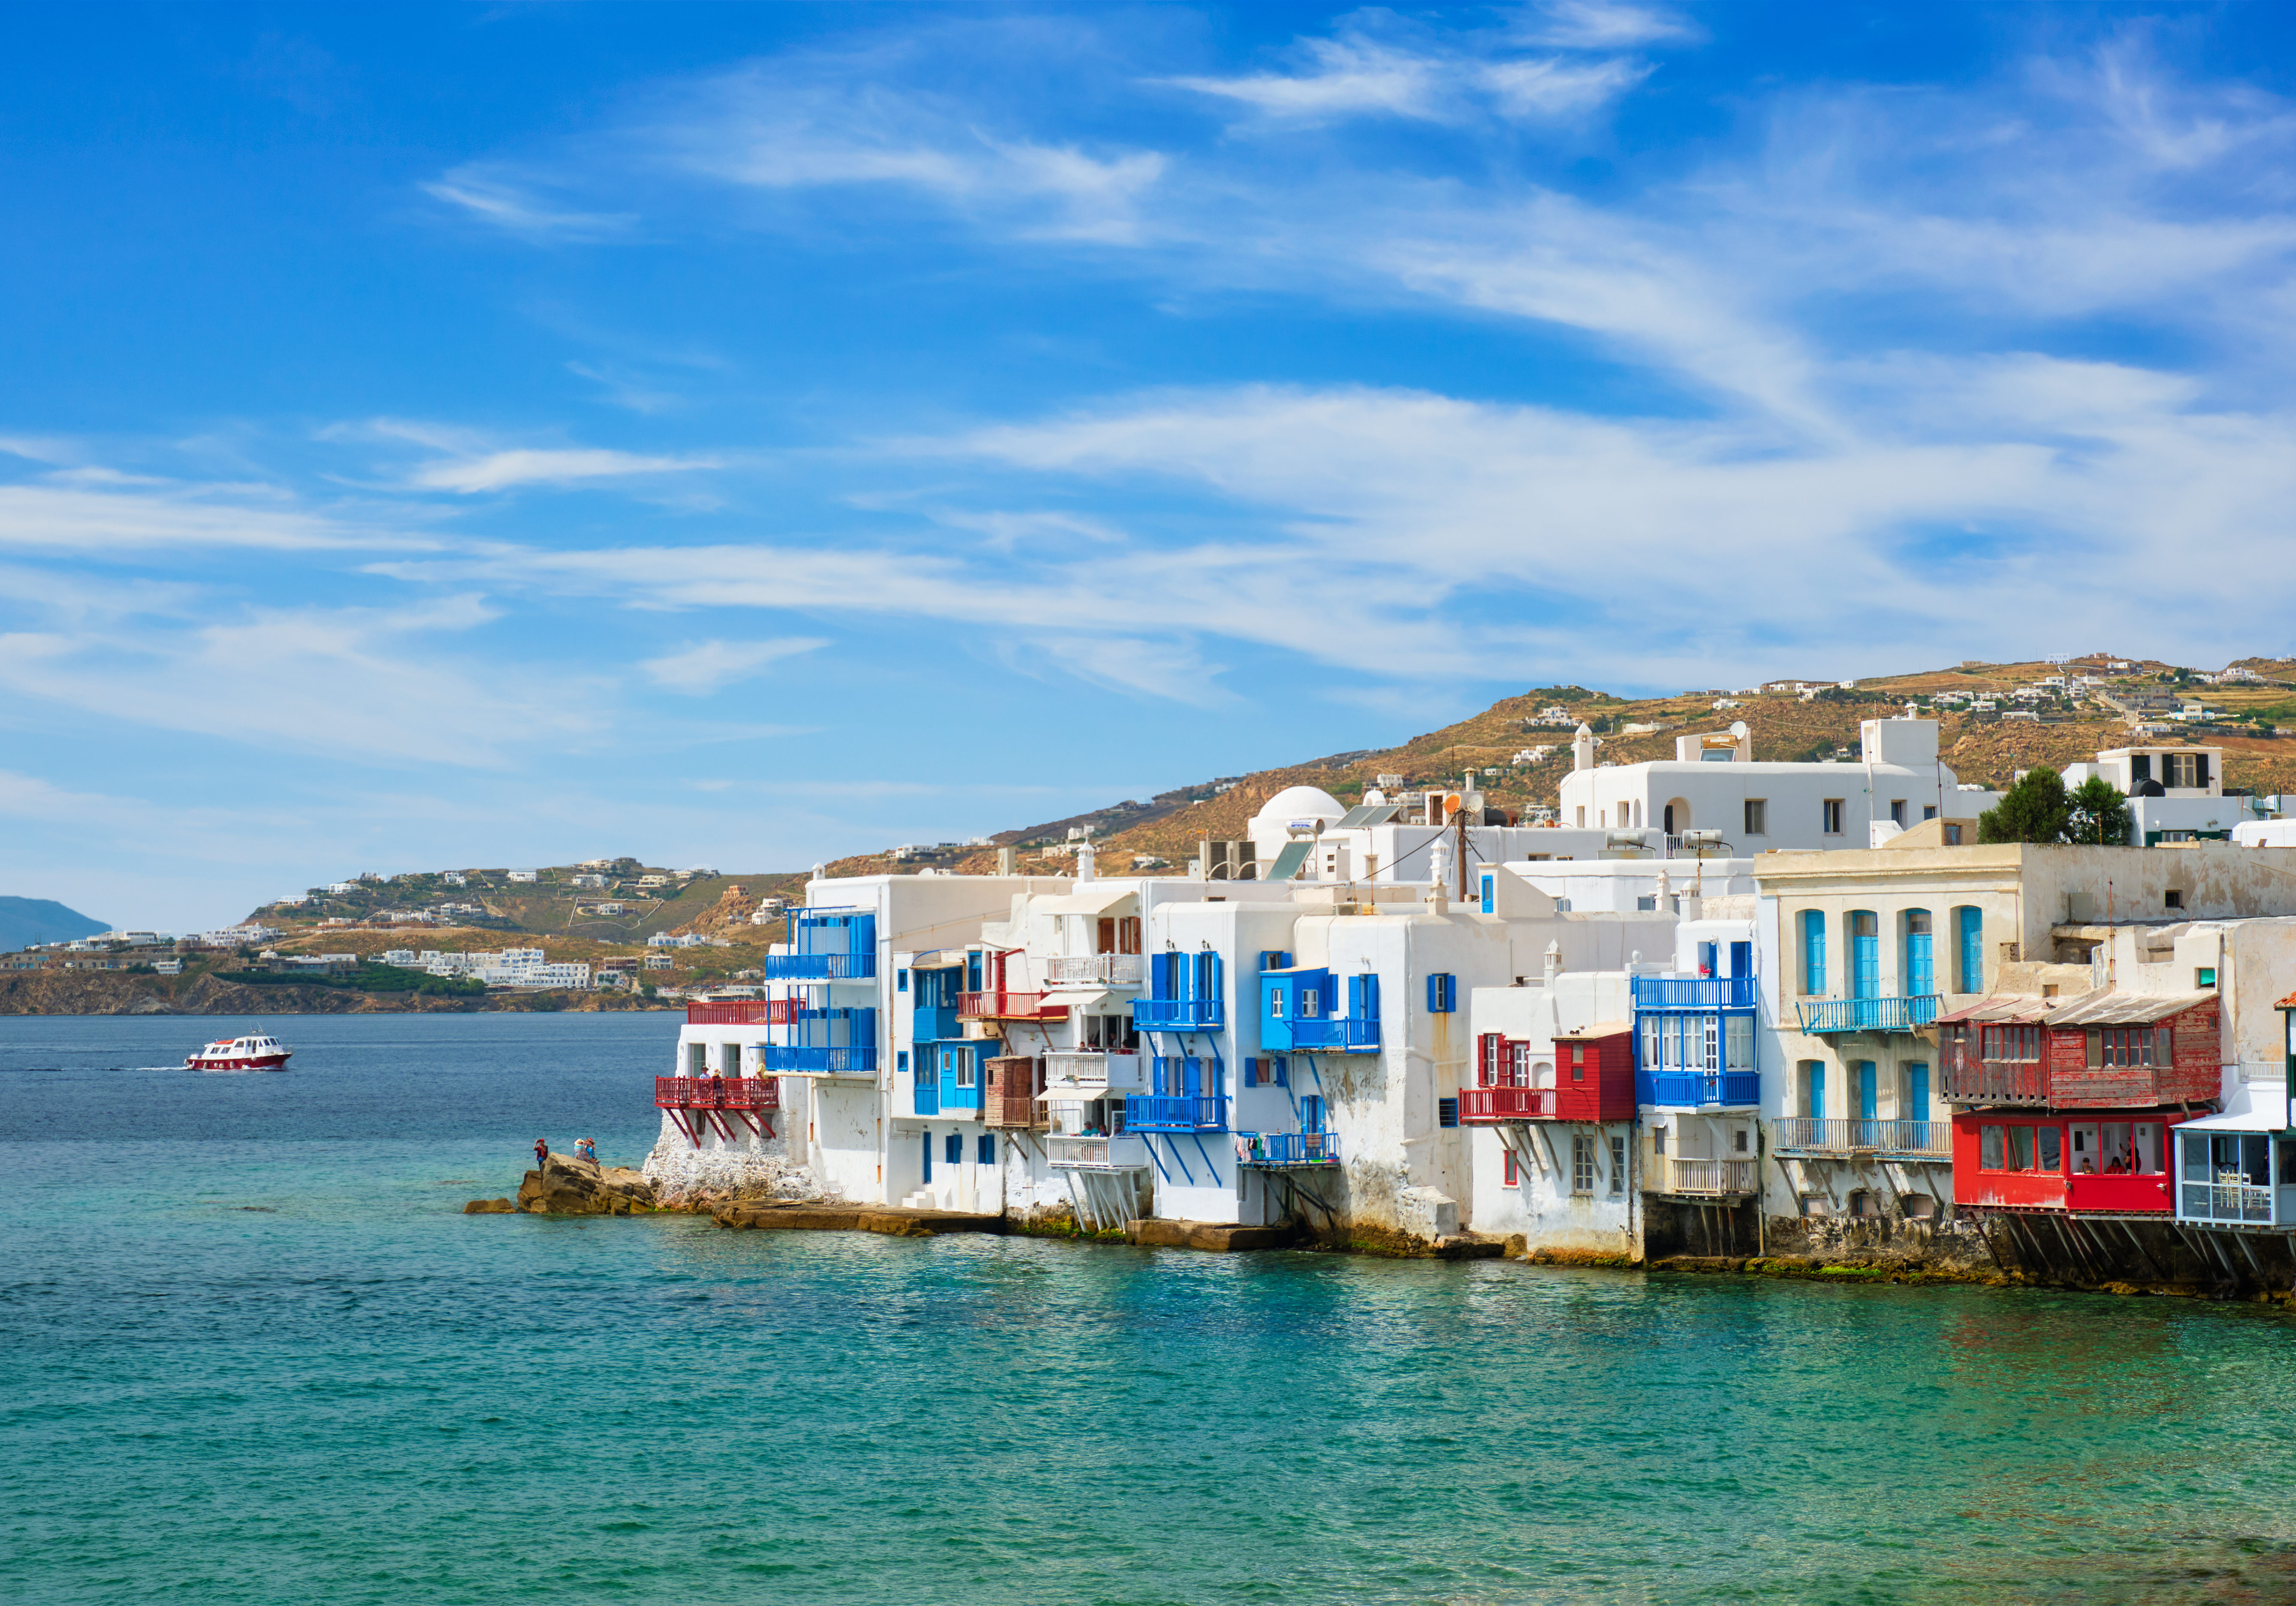 Scenic Little Venice houses in Chora Mykonos town with yacht and cruise ship. Mykonos island, Greecer